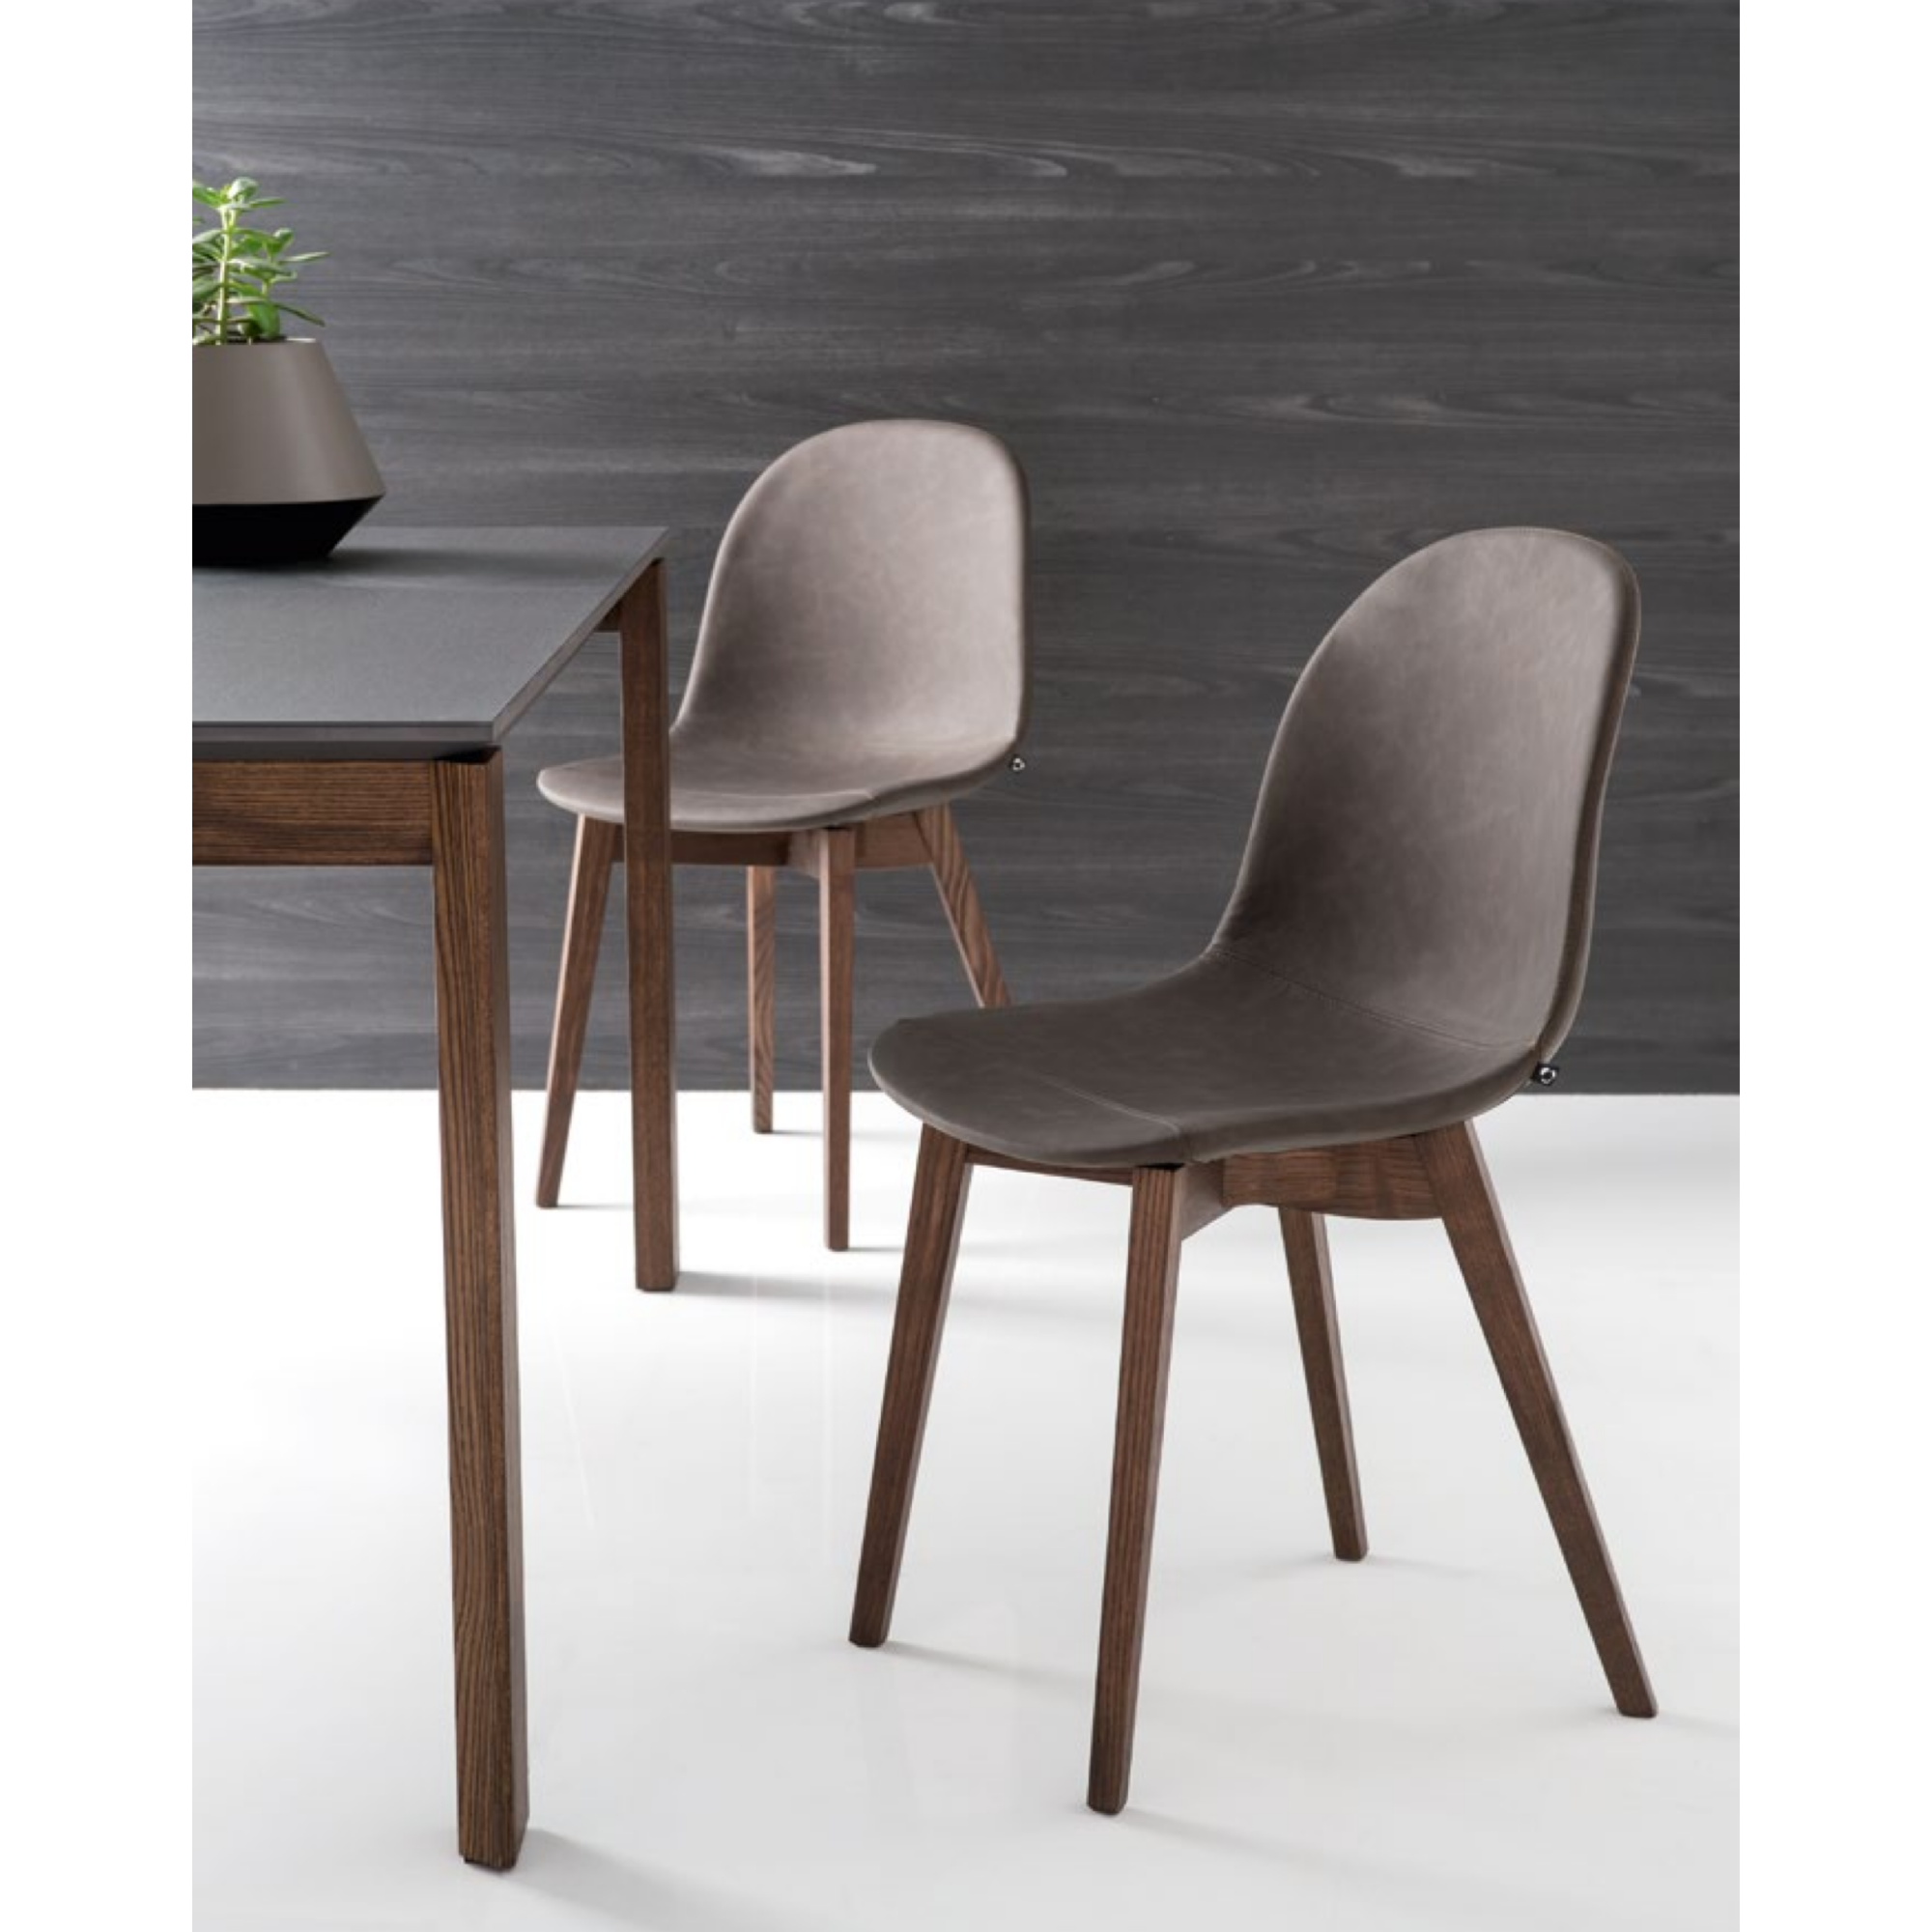 ACADEMY CONNUBIA Chairs - Seats COVERED | Masonionline WOOD | CB/1665 |